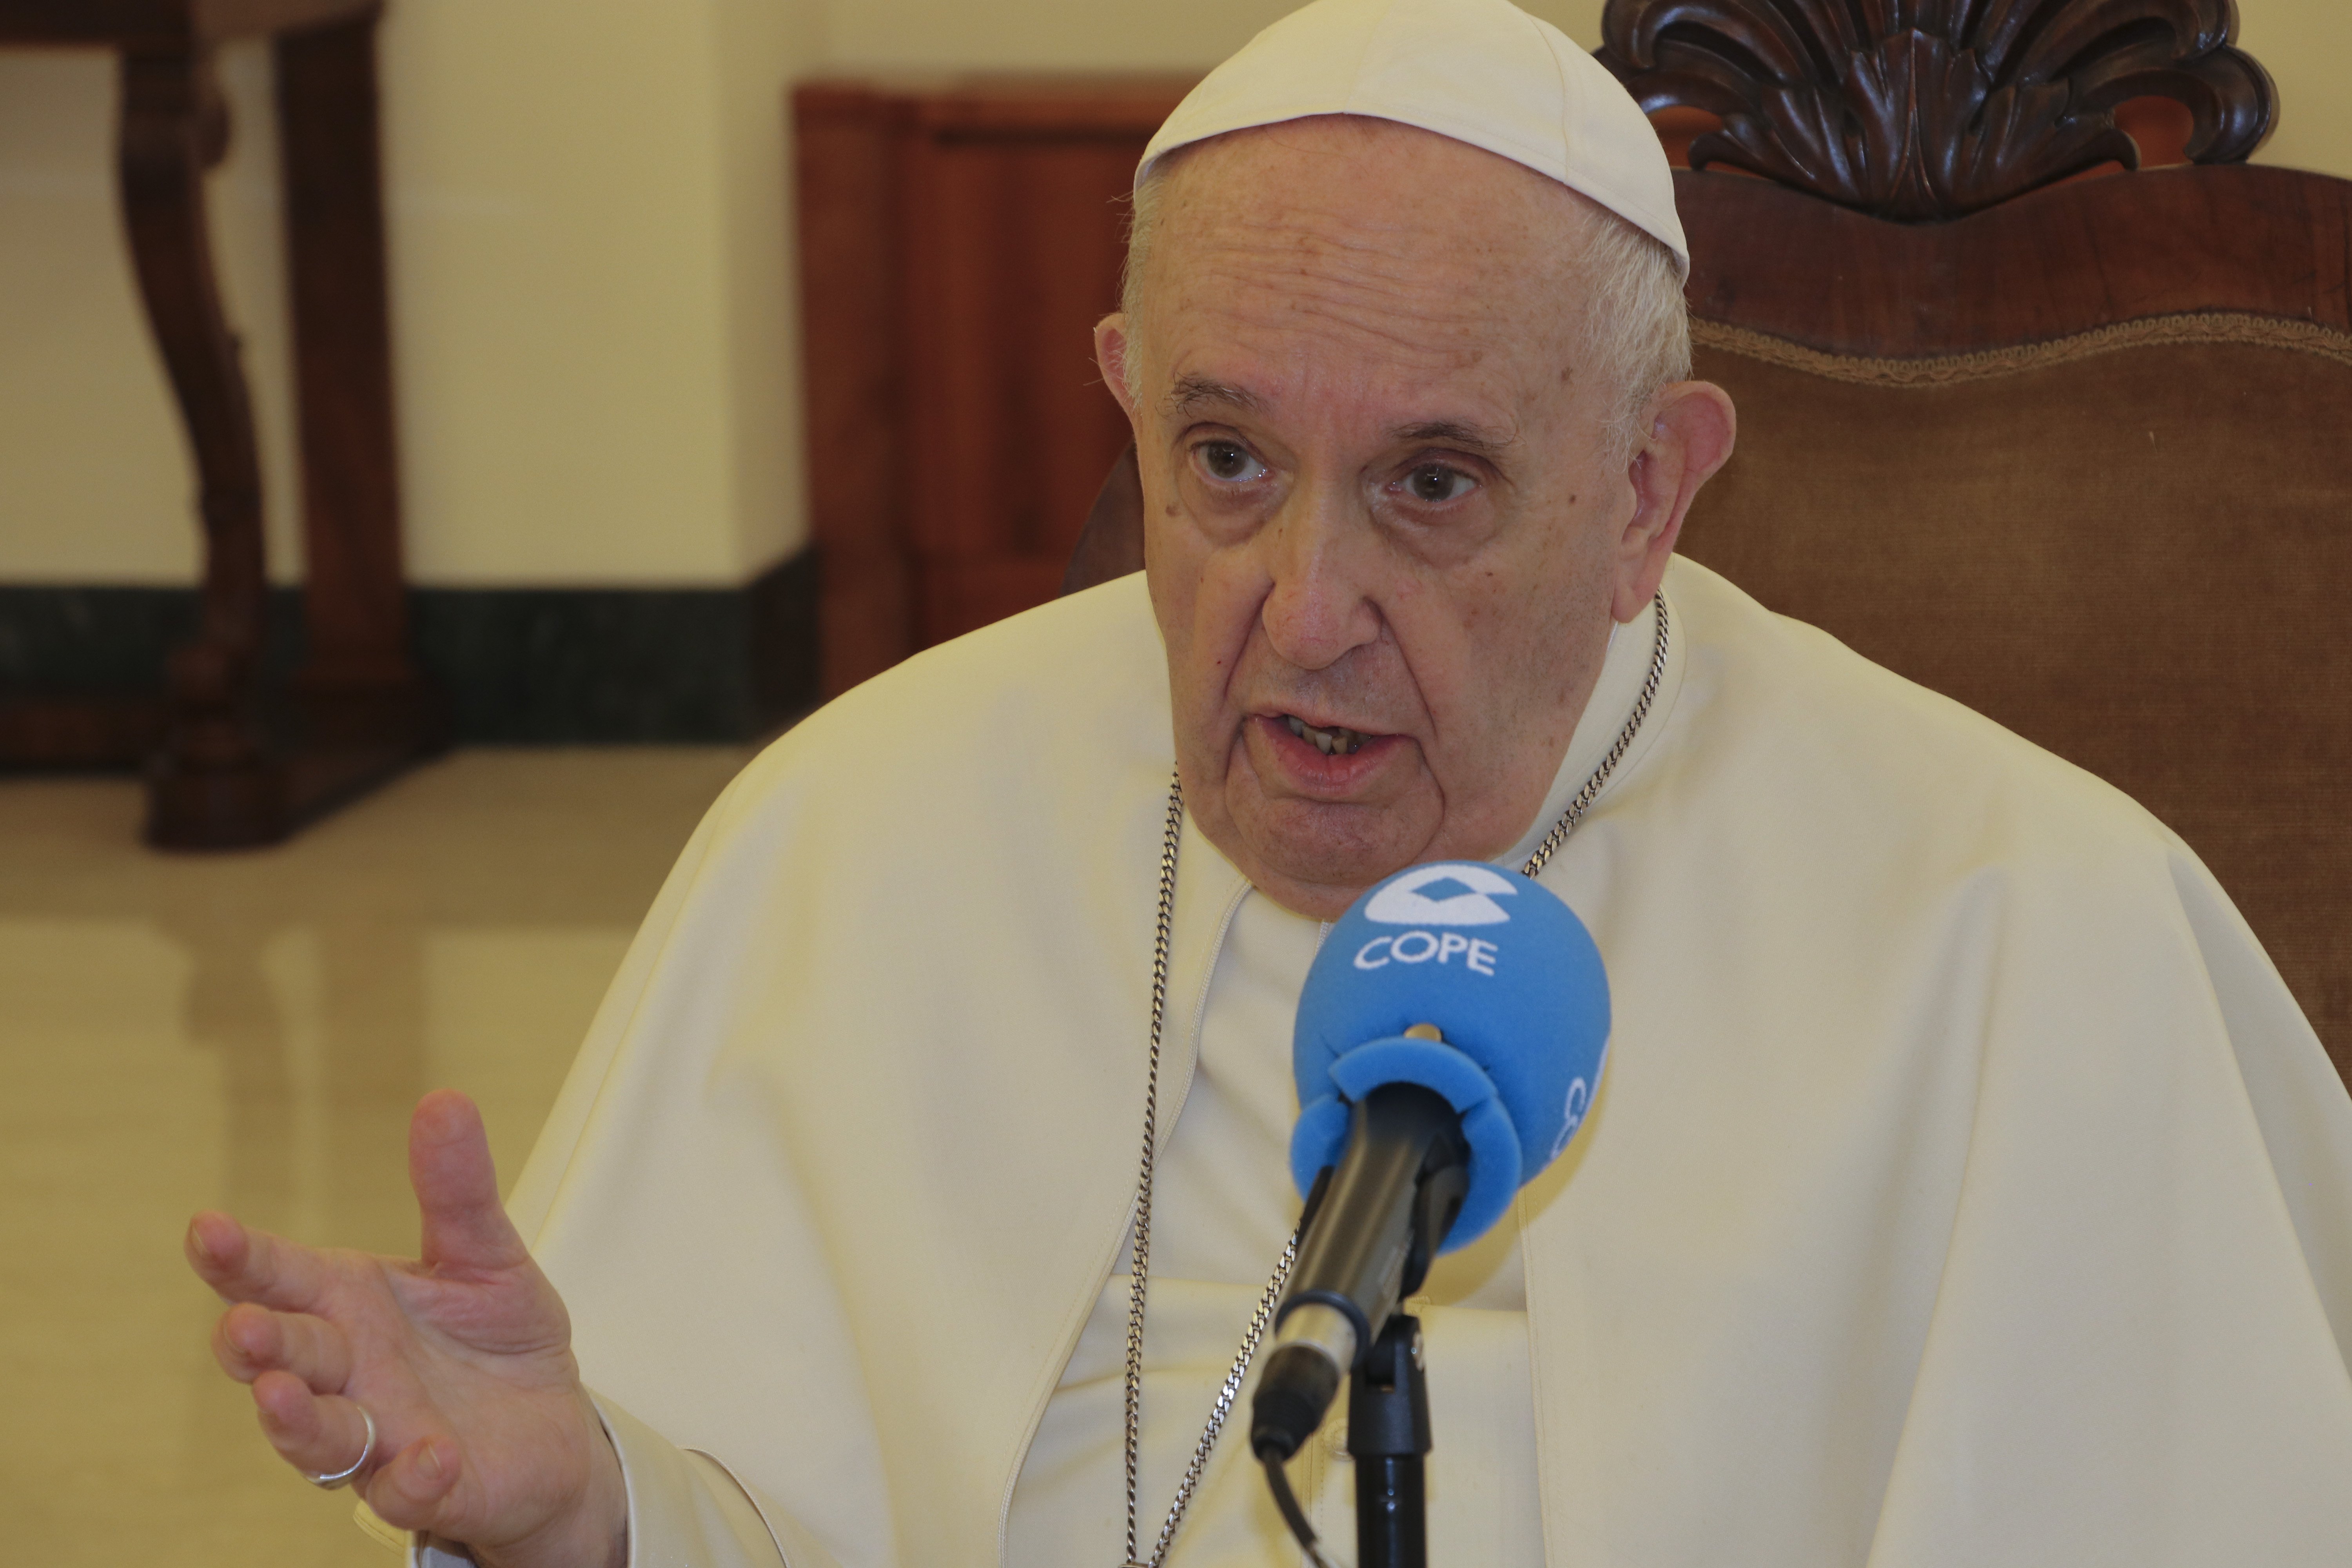 Pope Francis speaks during an interview with Carlos Herrera of COPE, the radio network owned by the Spanish bishops' conference, at the Vatican in late August. In a 90-minute interview, the pope addressed the situation in Afghanistan, the legalization of 